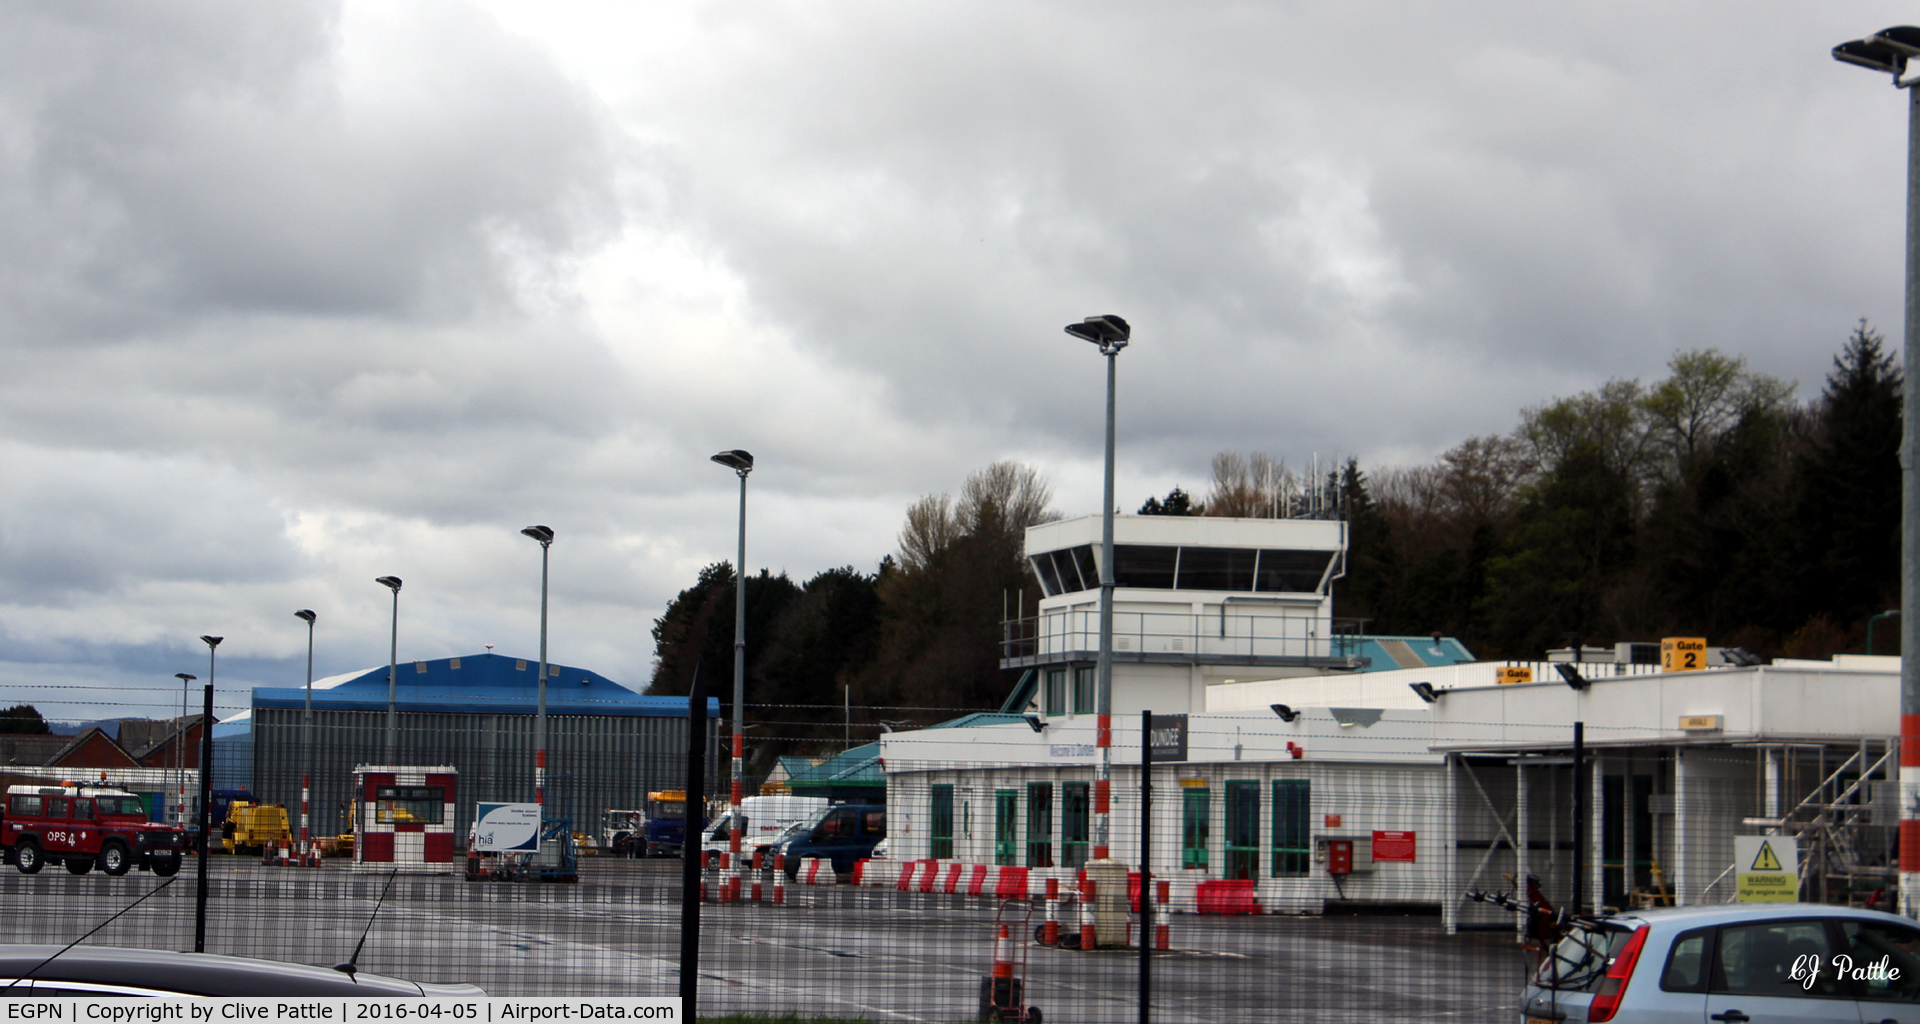 Dundee Airport, Dundee, Scotland United Kingdom (EGPN) - Terminal 1 (and only) at Dundee Riverside airport EGPN